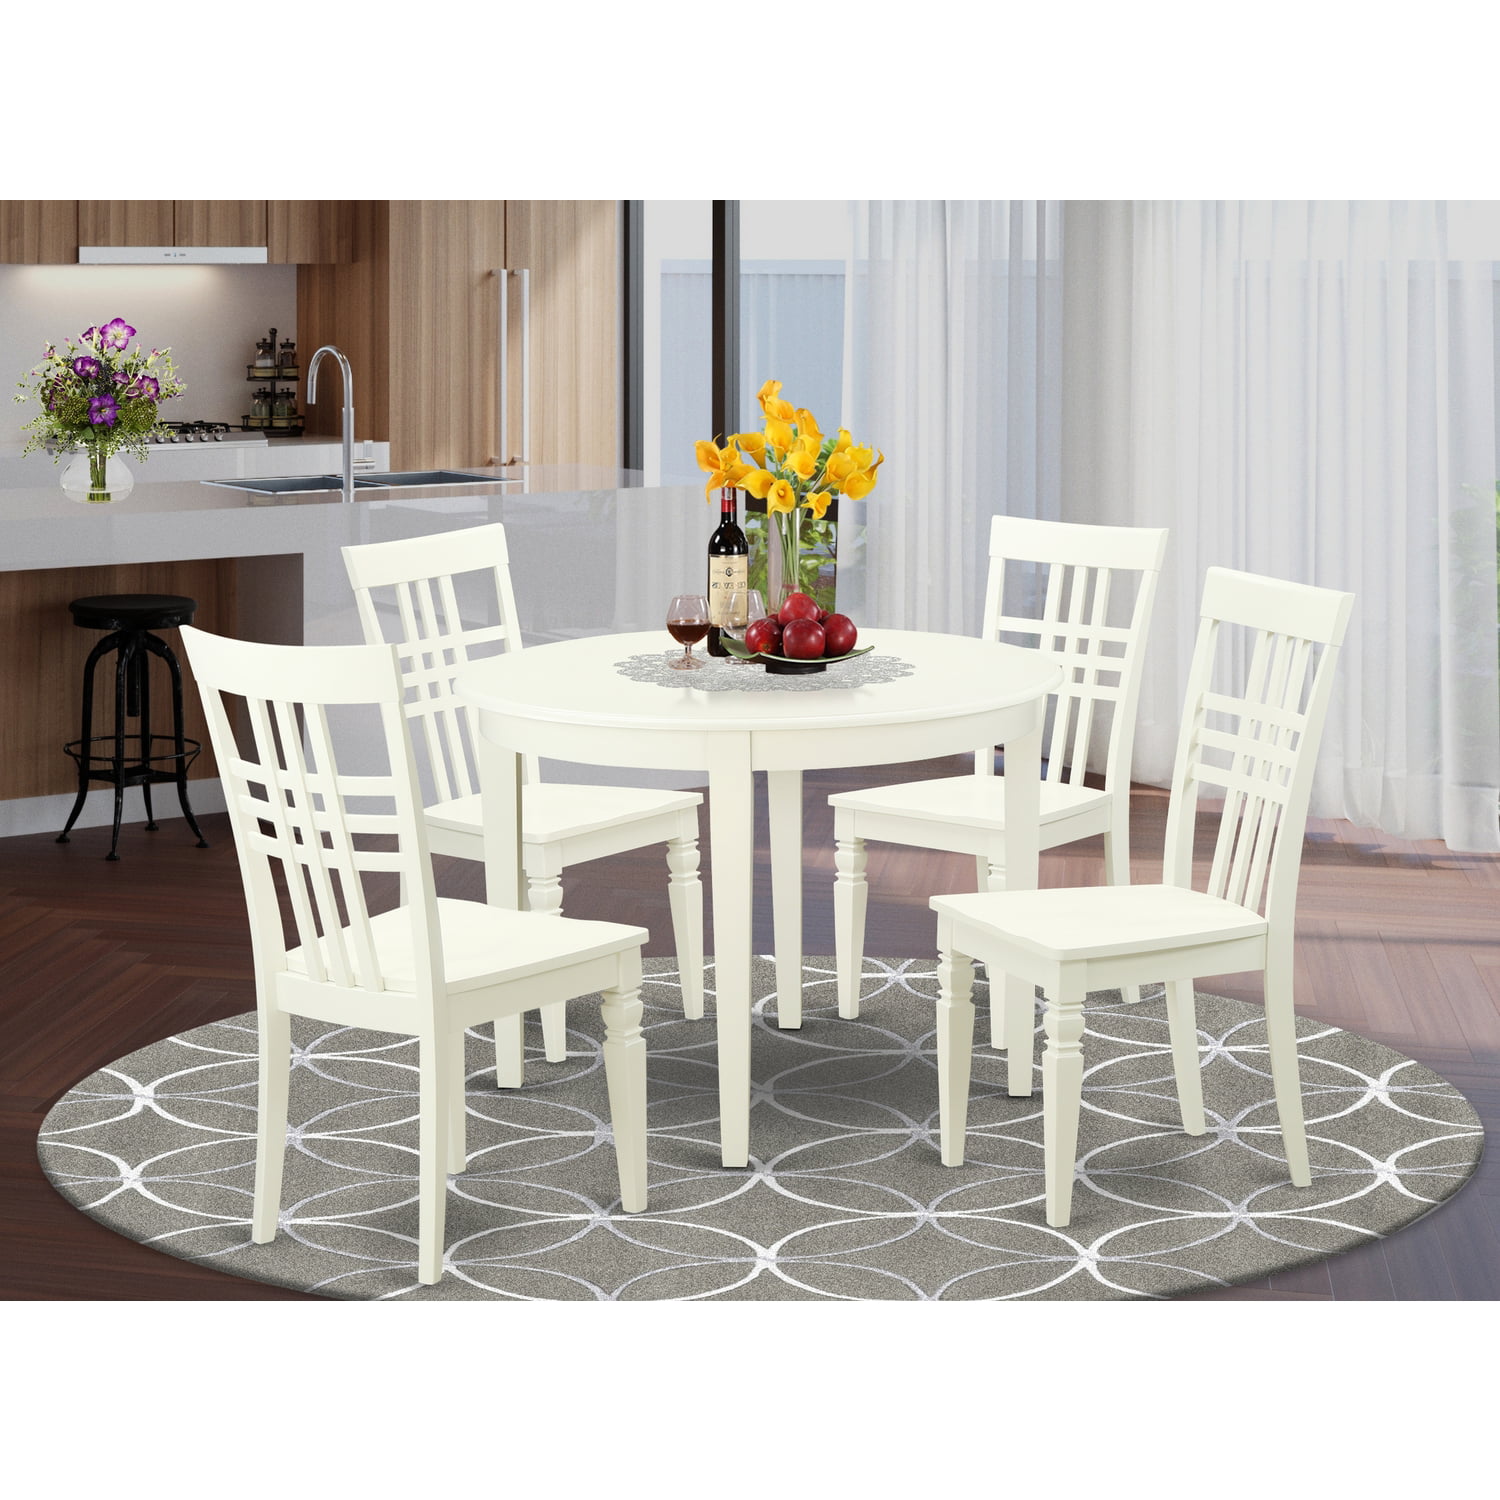 Small Kitchen Table Set With A Boston Dining Table And Kitchen Chairs ...